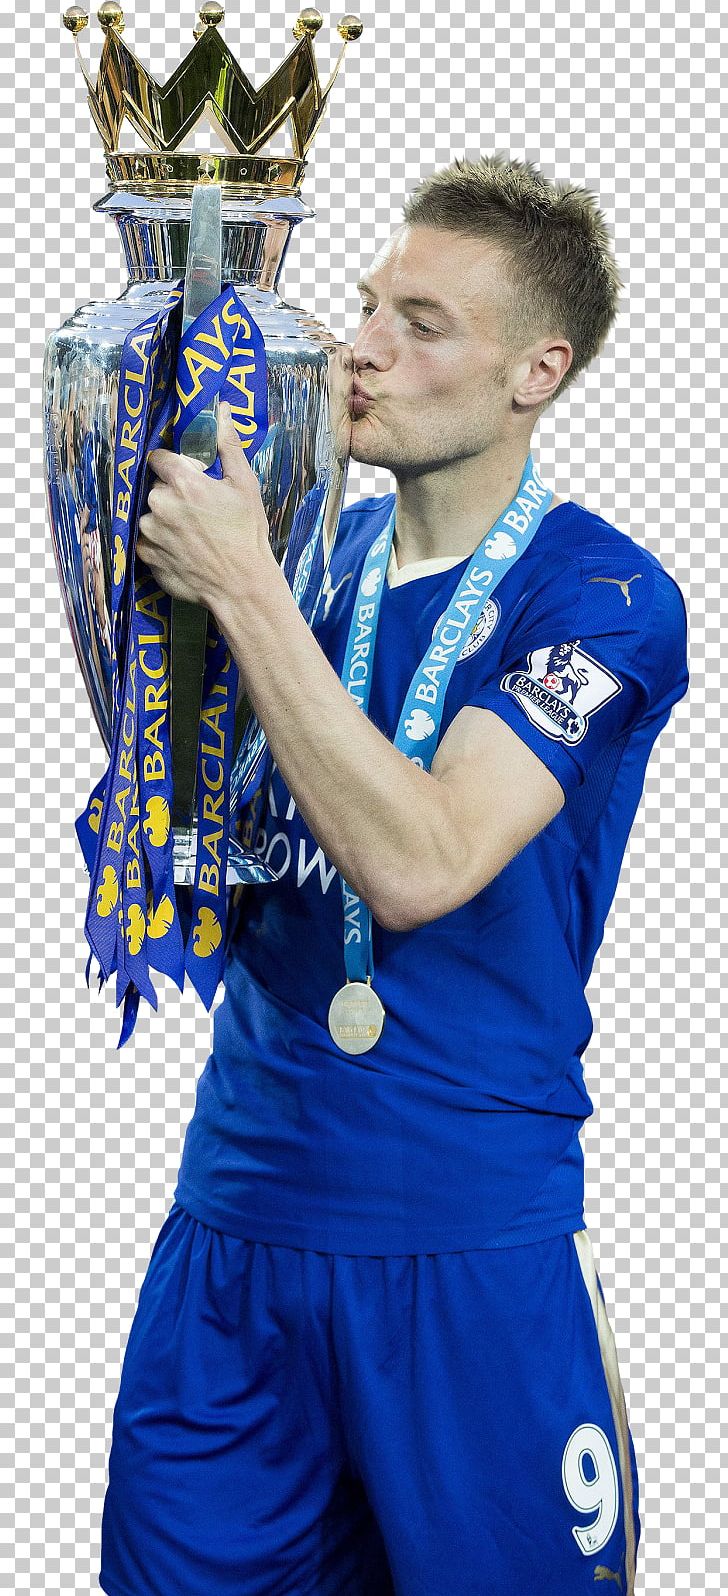 Jamie Vardy Leicester City F.C. Sport Football Peloc PNG, Clipart, Blue, Coach, Defender, Electric Blue, Football Free PNG Download